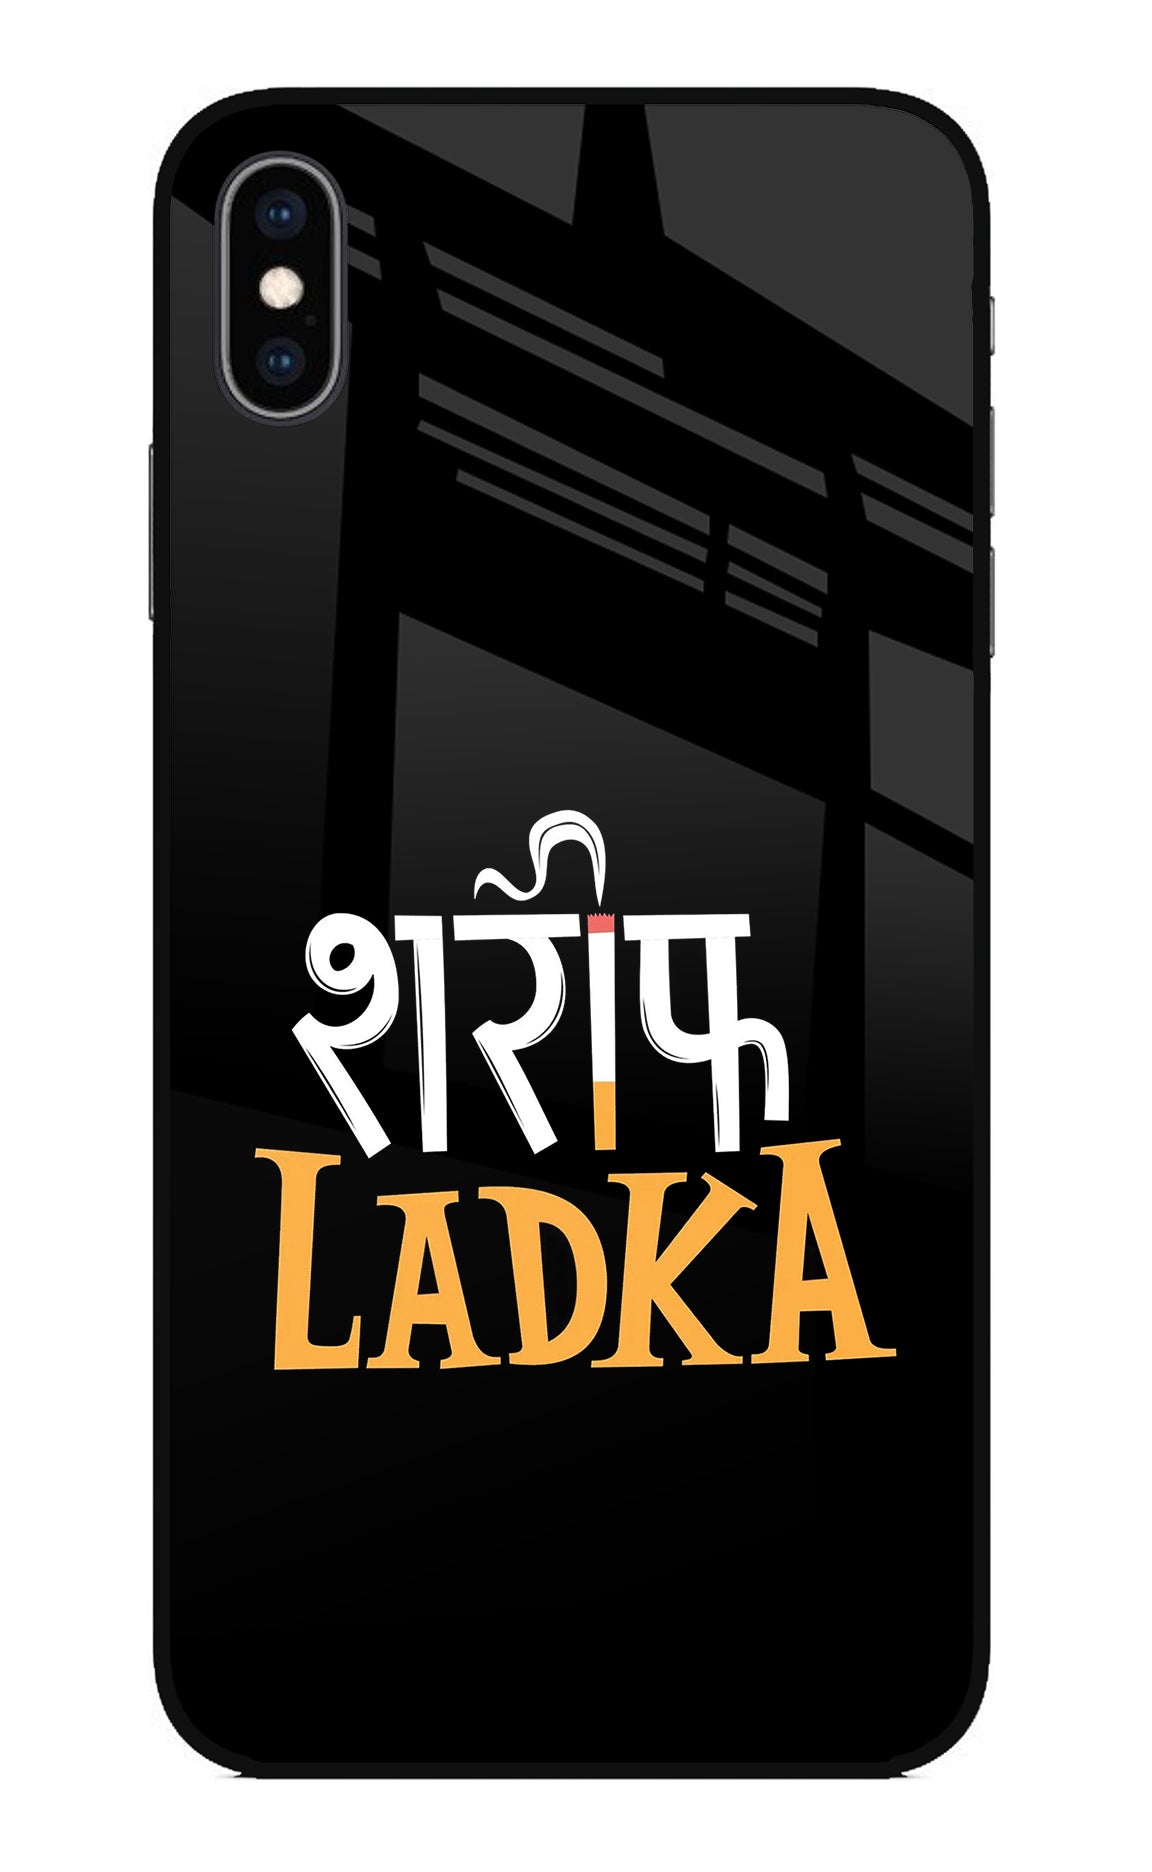 Shareef Ladka iPhone XS Max Back Cover